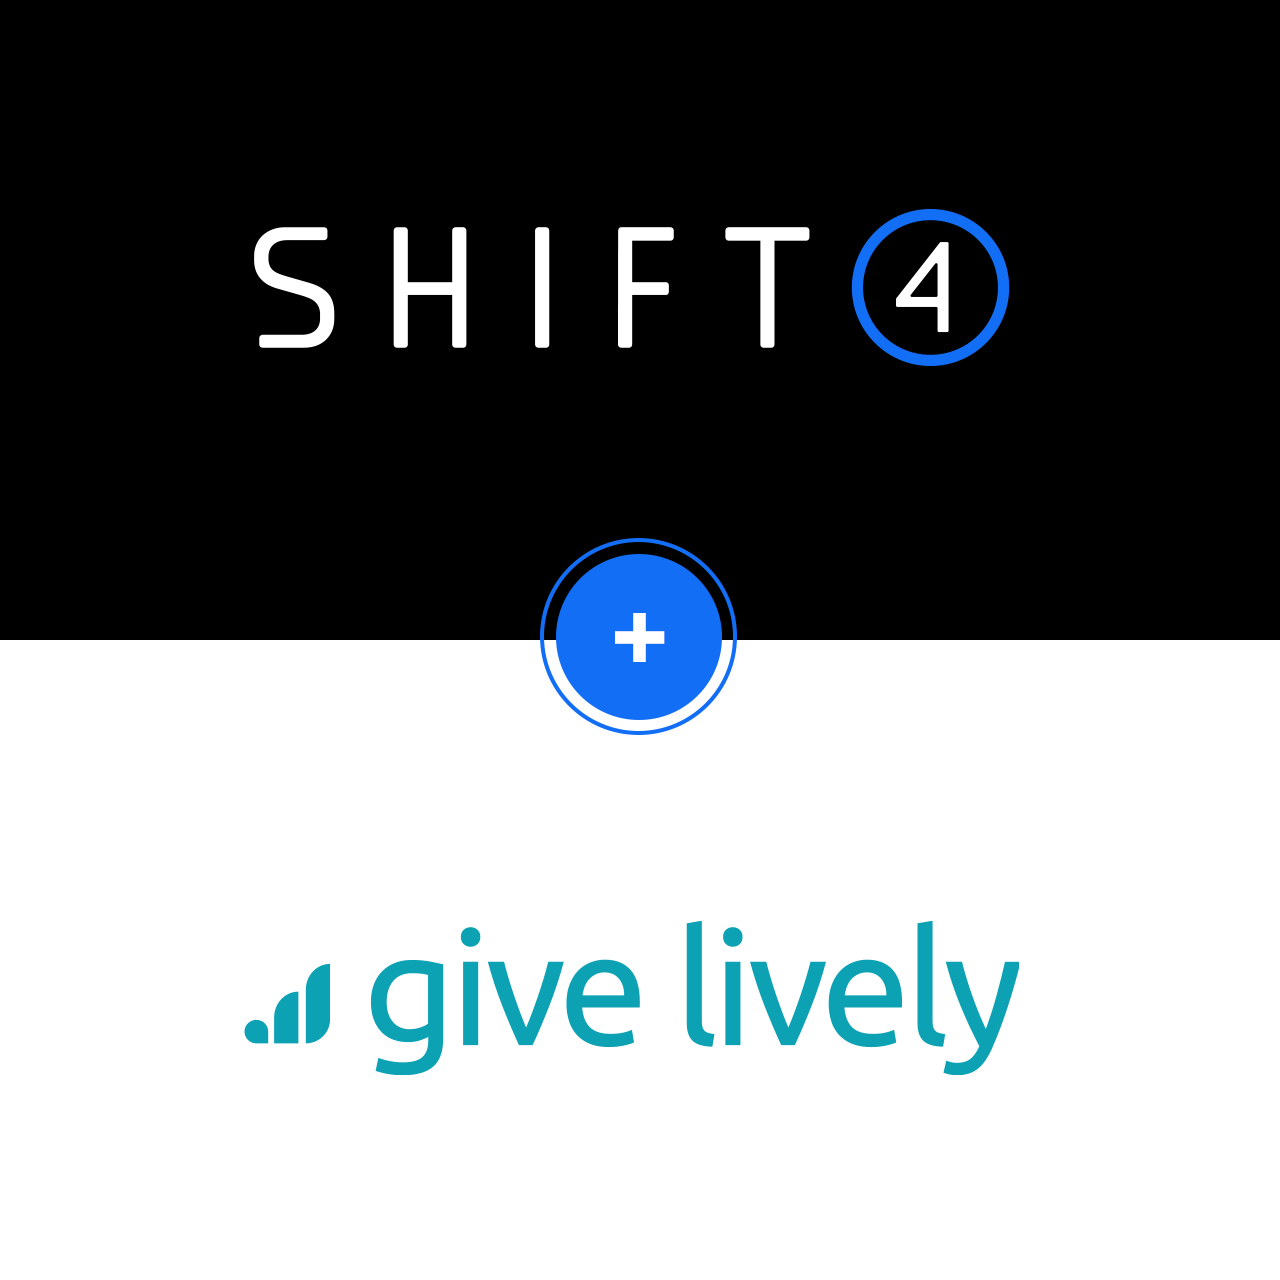 Give Lively and Shift4 logos for partnership press release